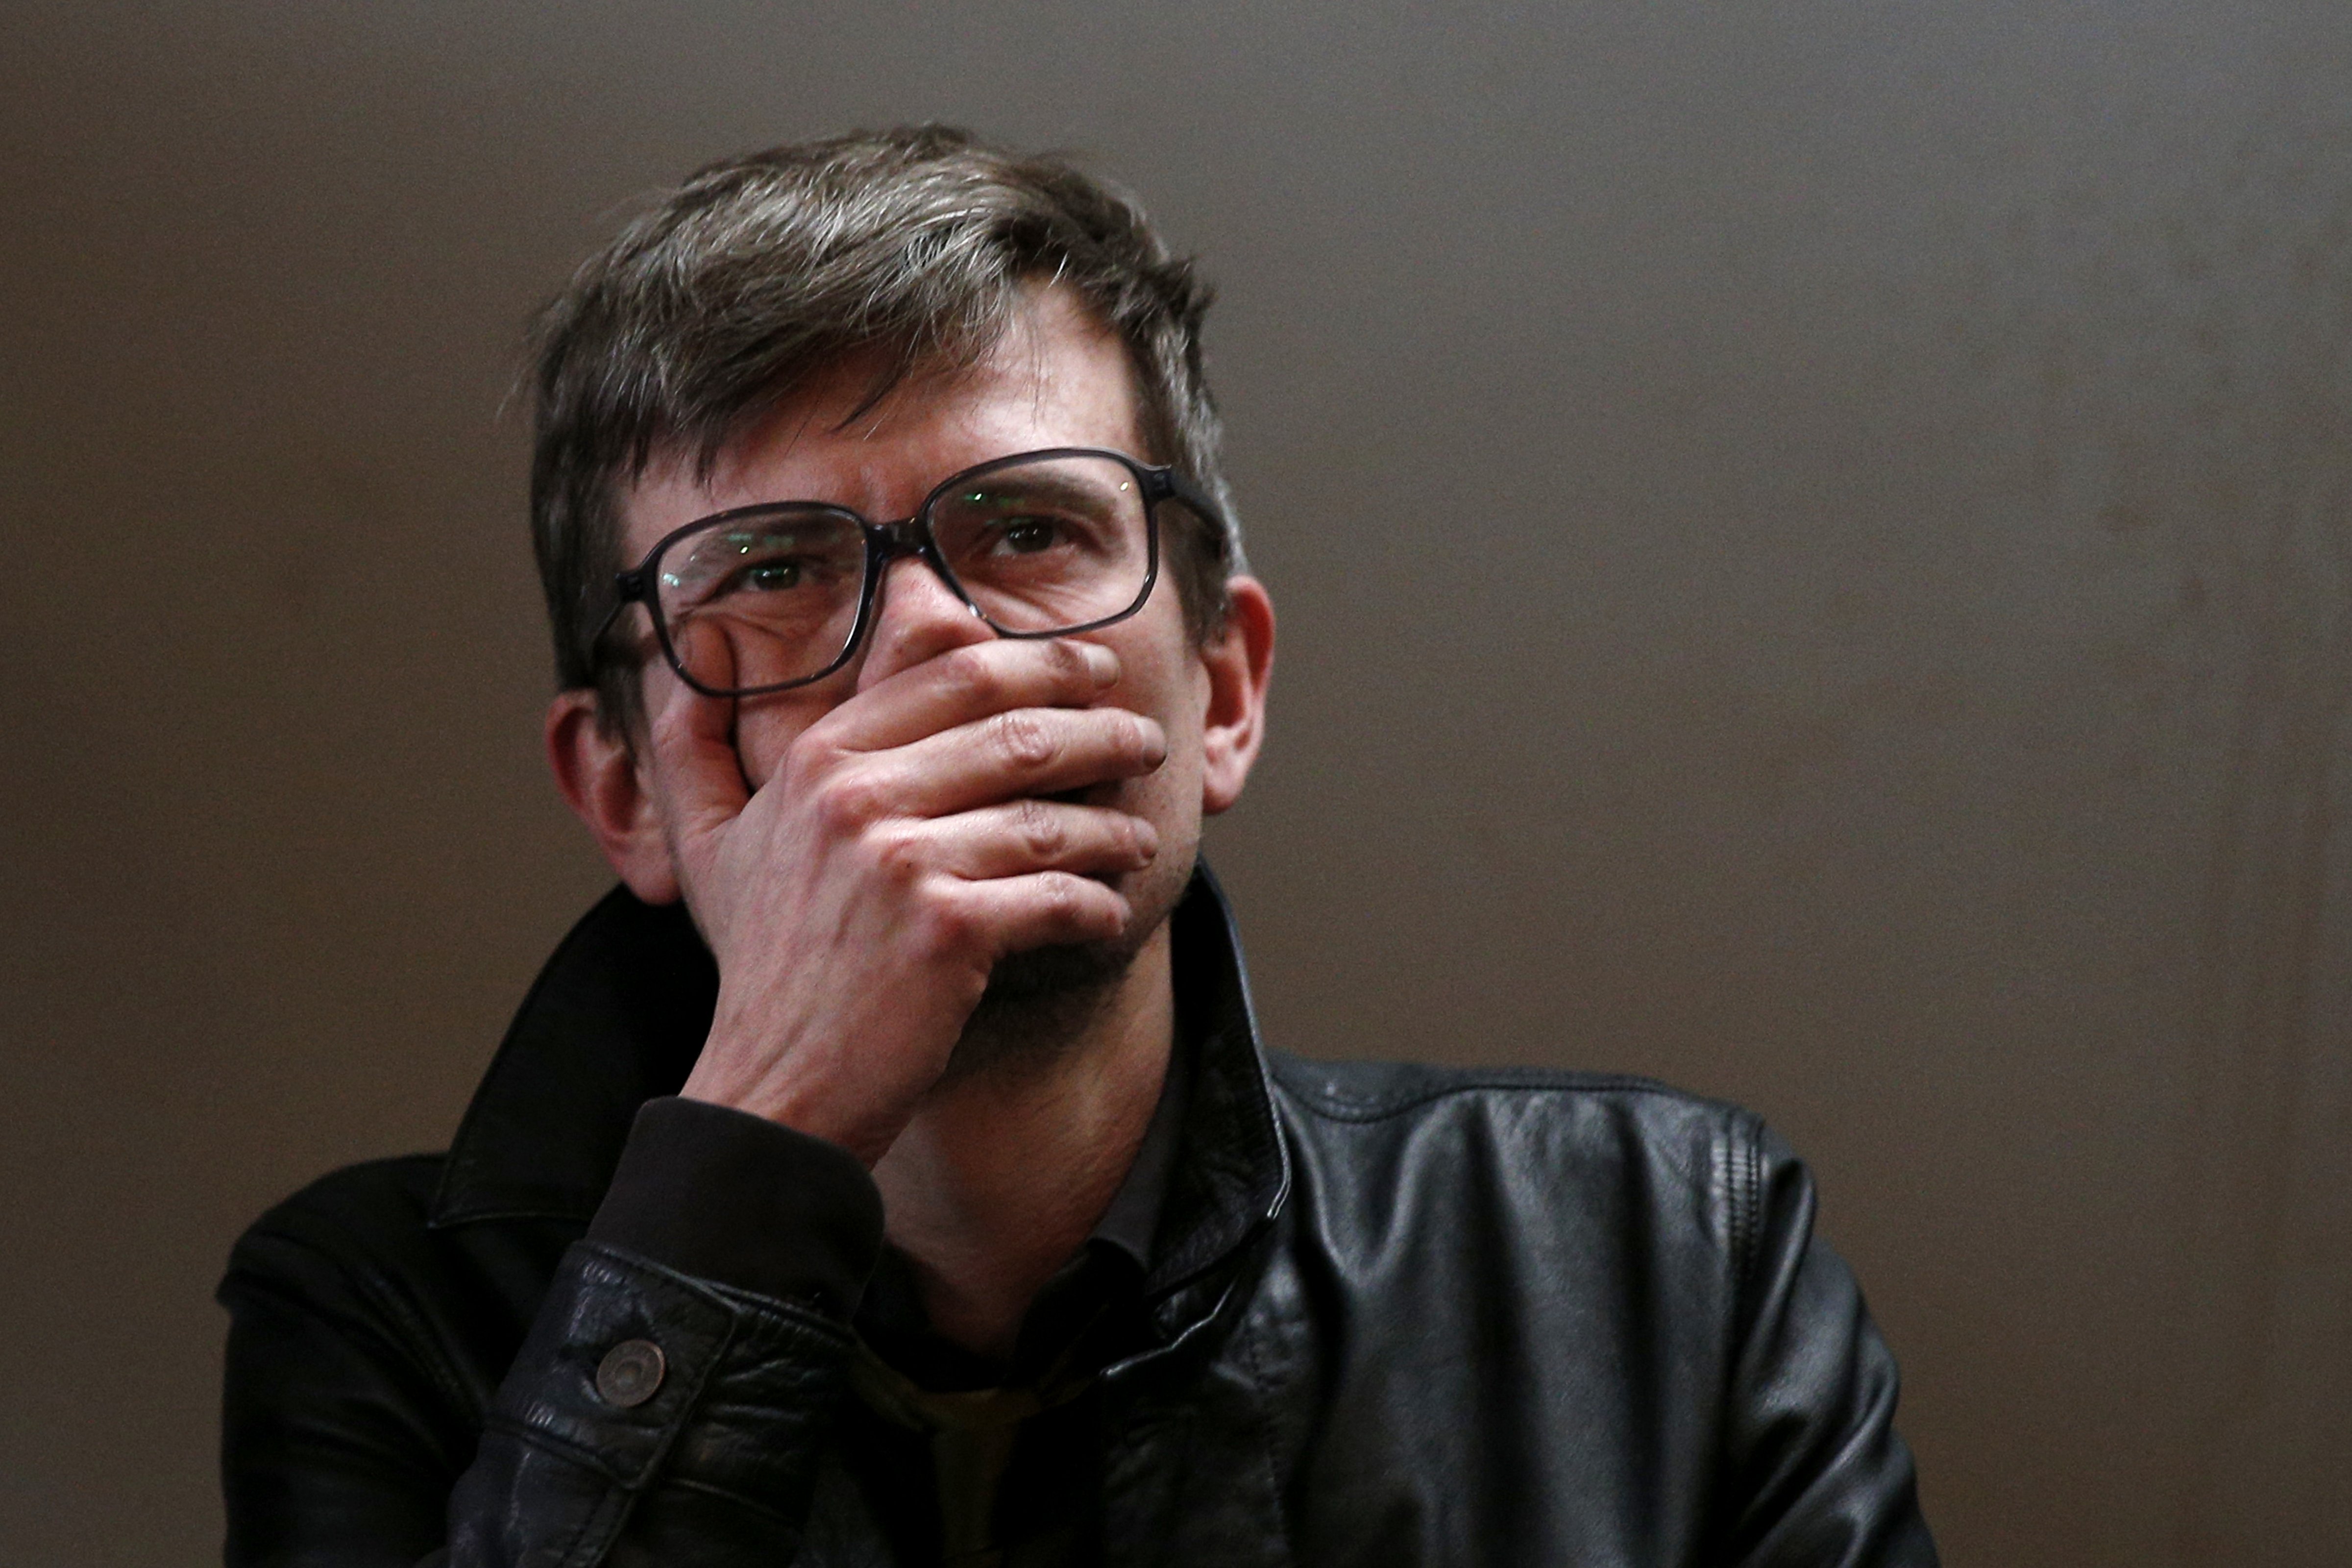 <i>Charlie Hebdo</i> caricaturist Rénald Luzier reacts during a press conference about the satirical magazine's next edition in Paris on Jan. 13, 2015 (Yoan Valat—EPA)